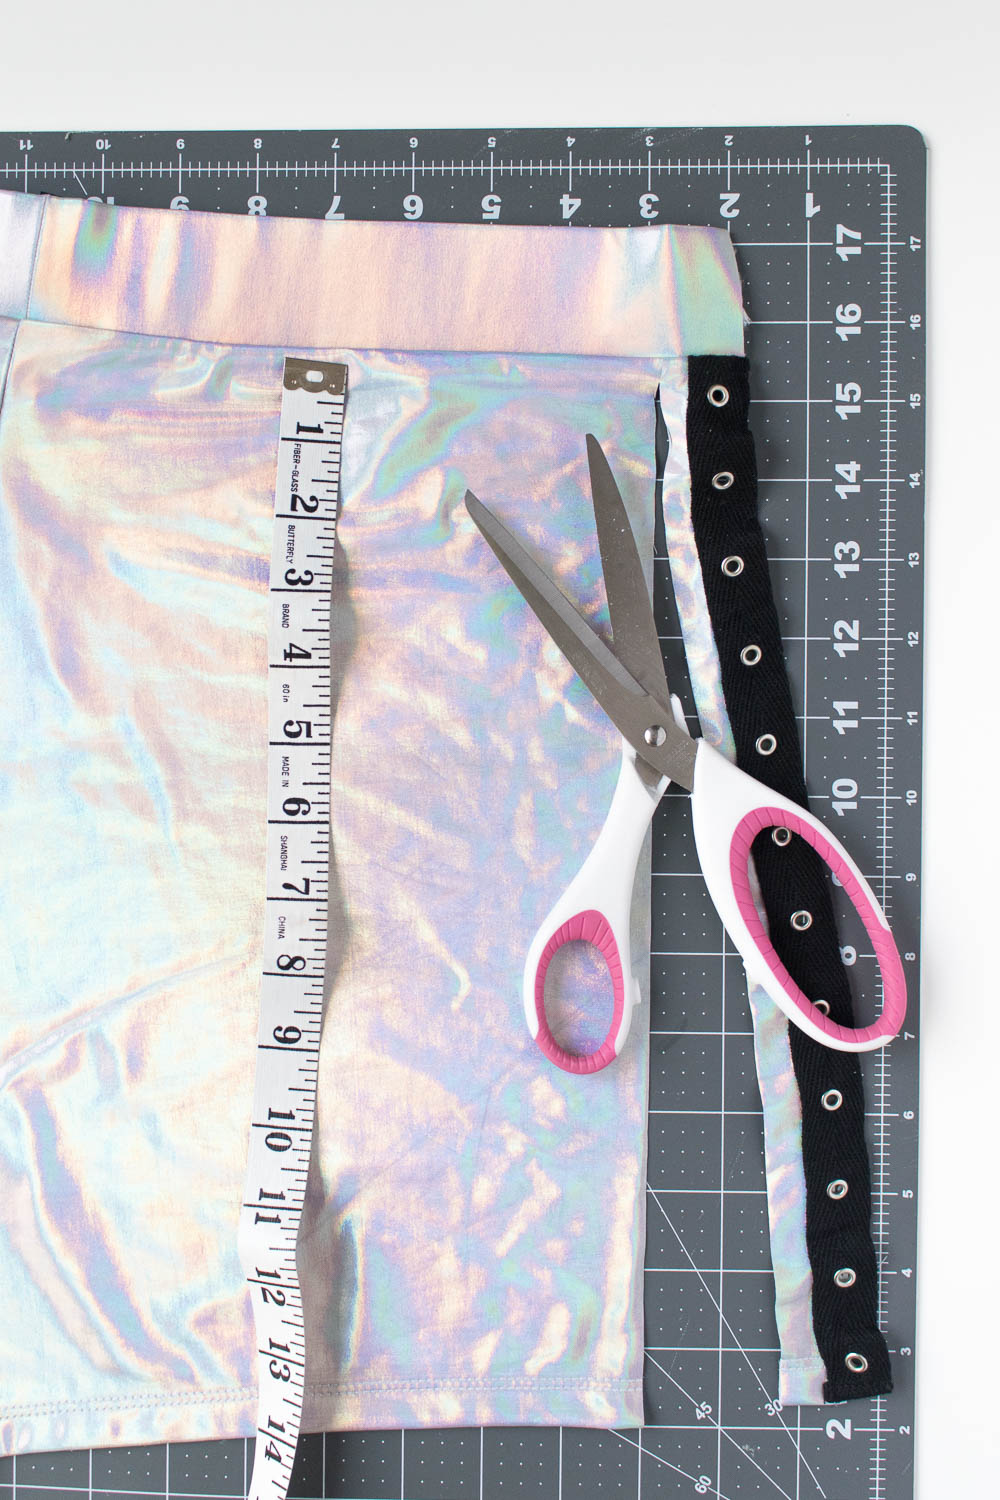 Throwback! How to Sew Holographic Scrunchies | Club Crafted